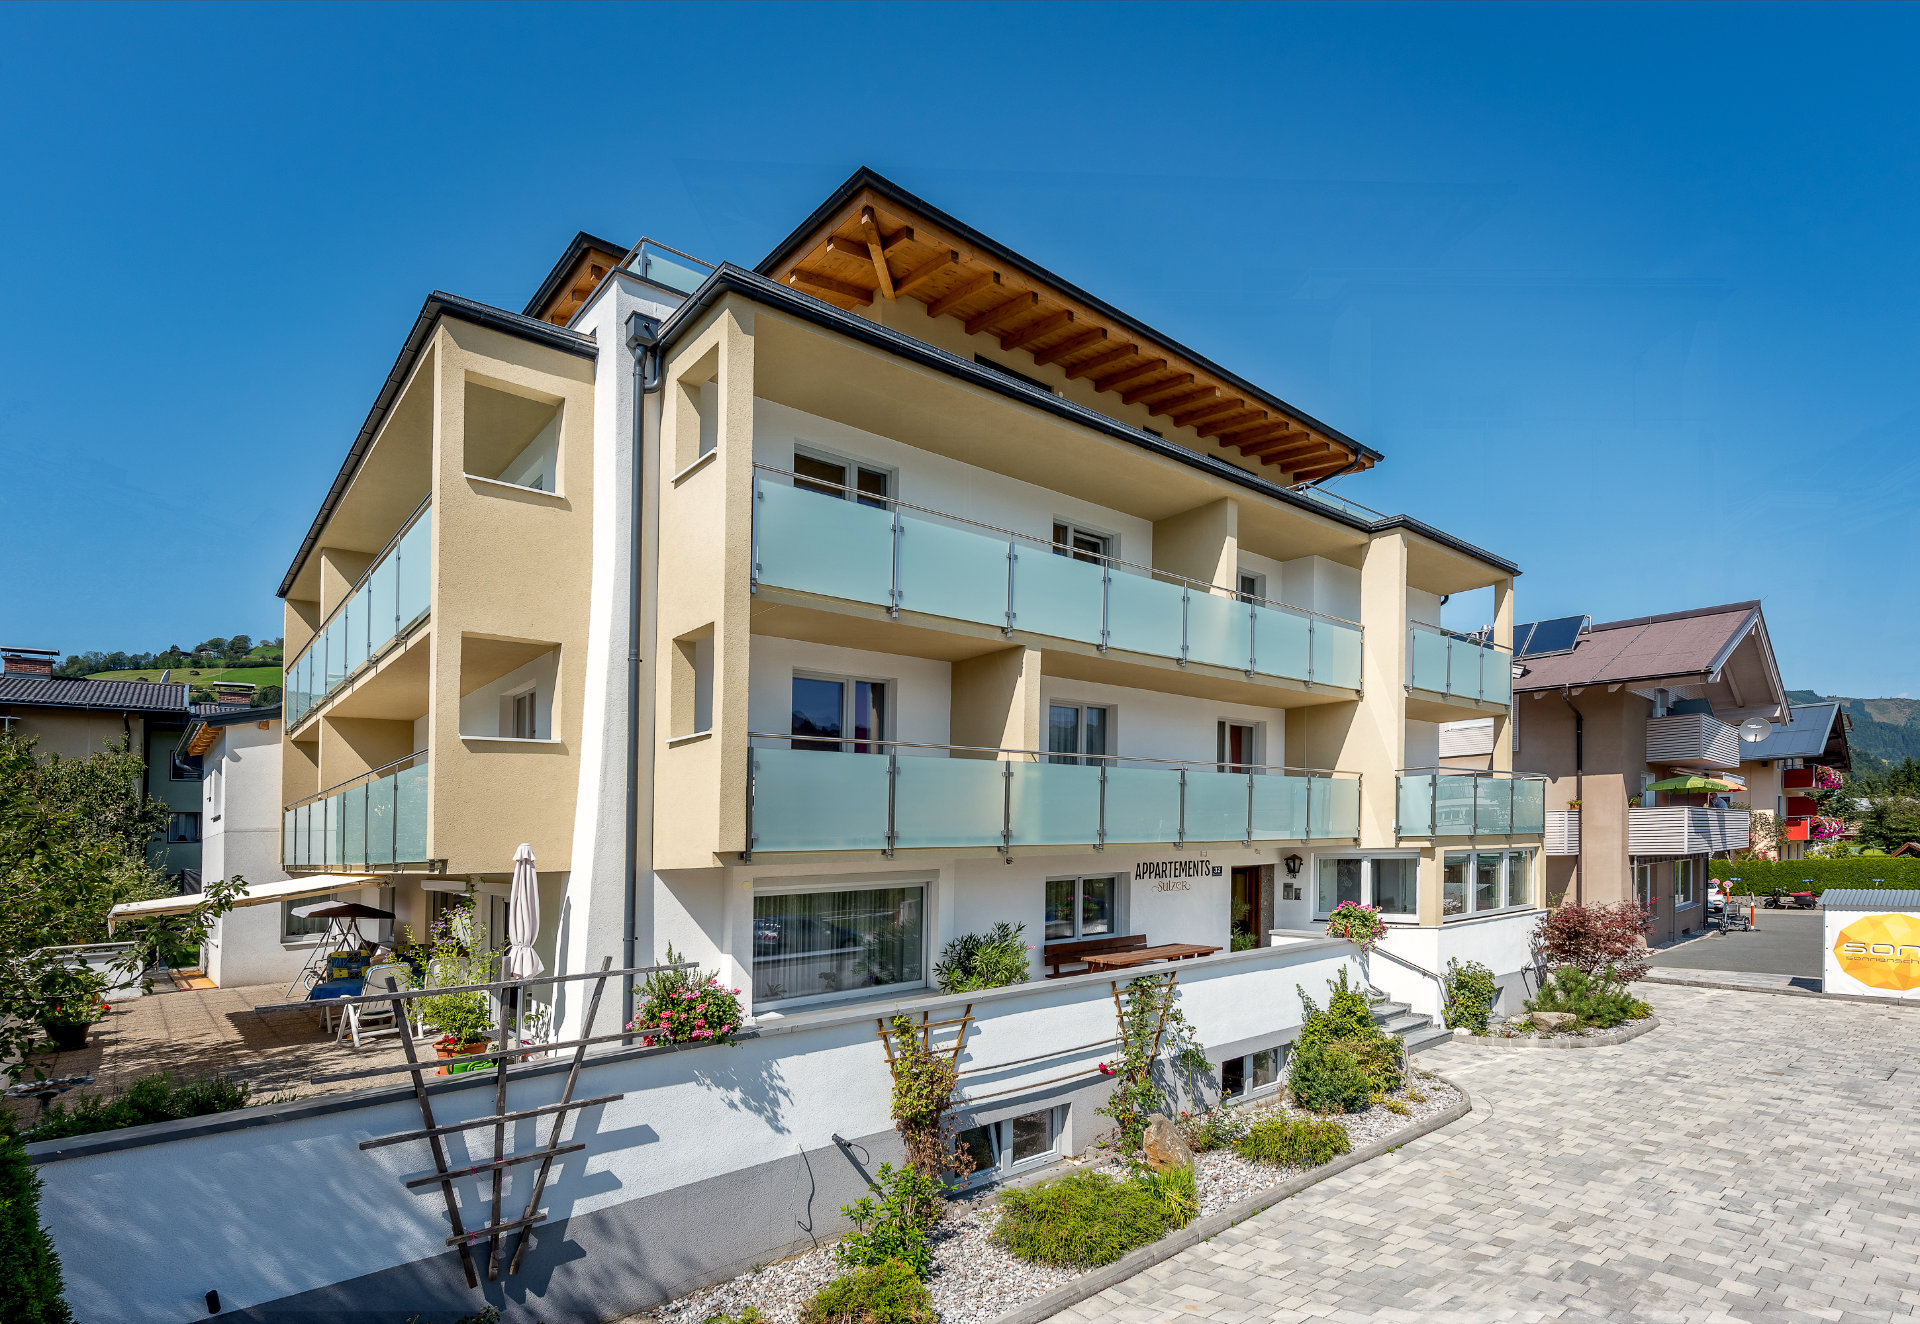 Appartements-Sulzer-Zell-am-See-Sommer-4